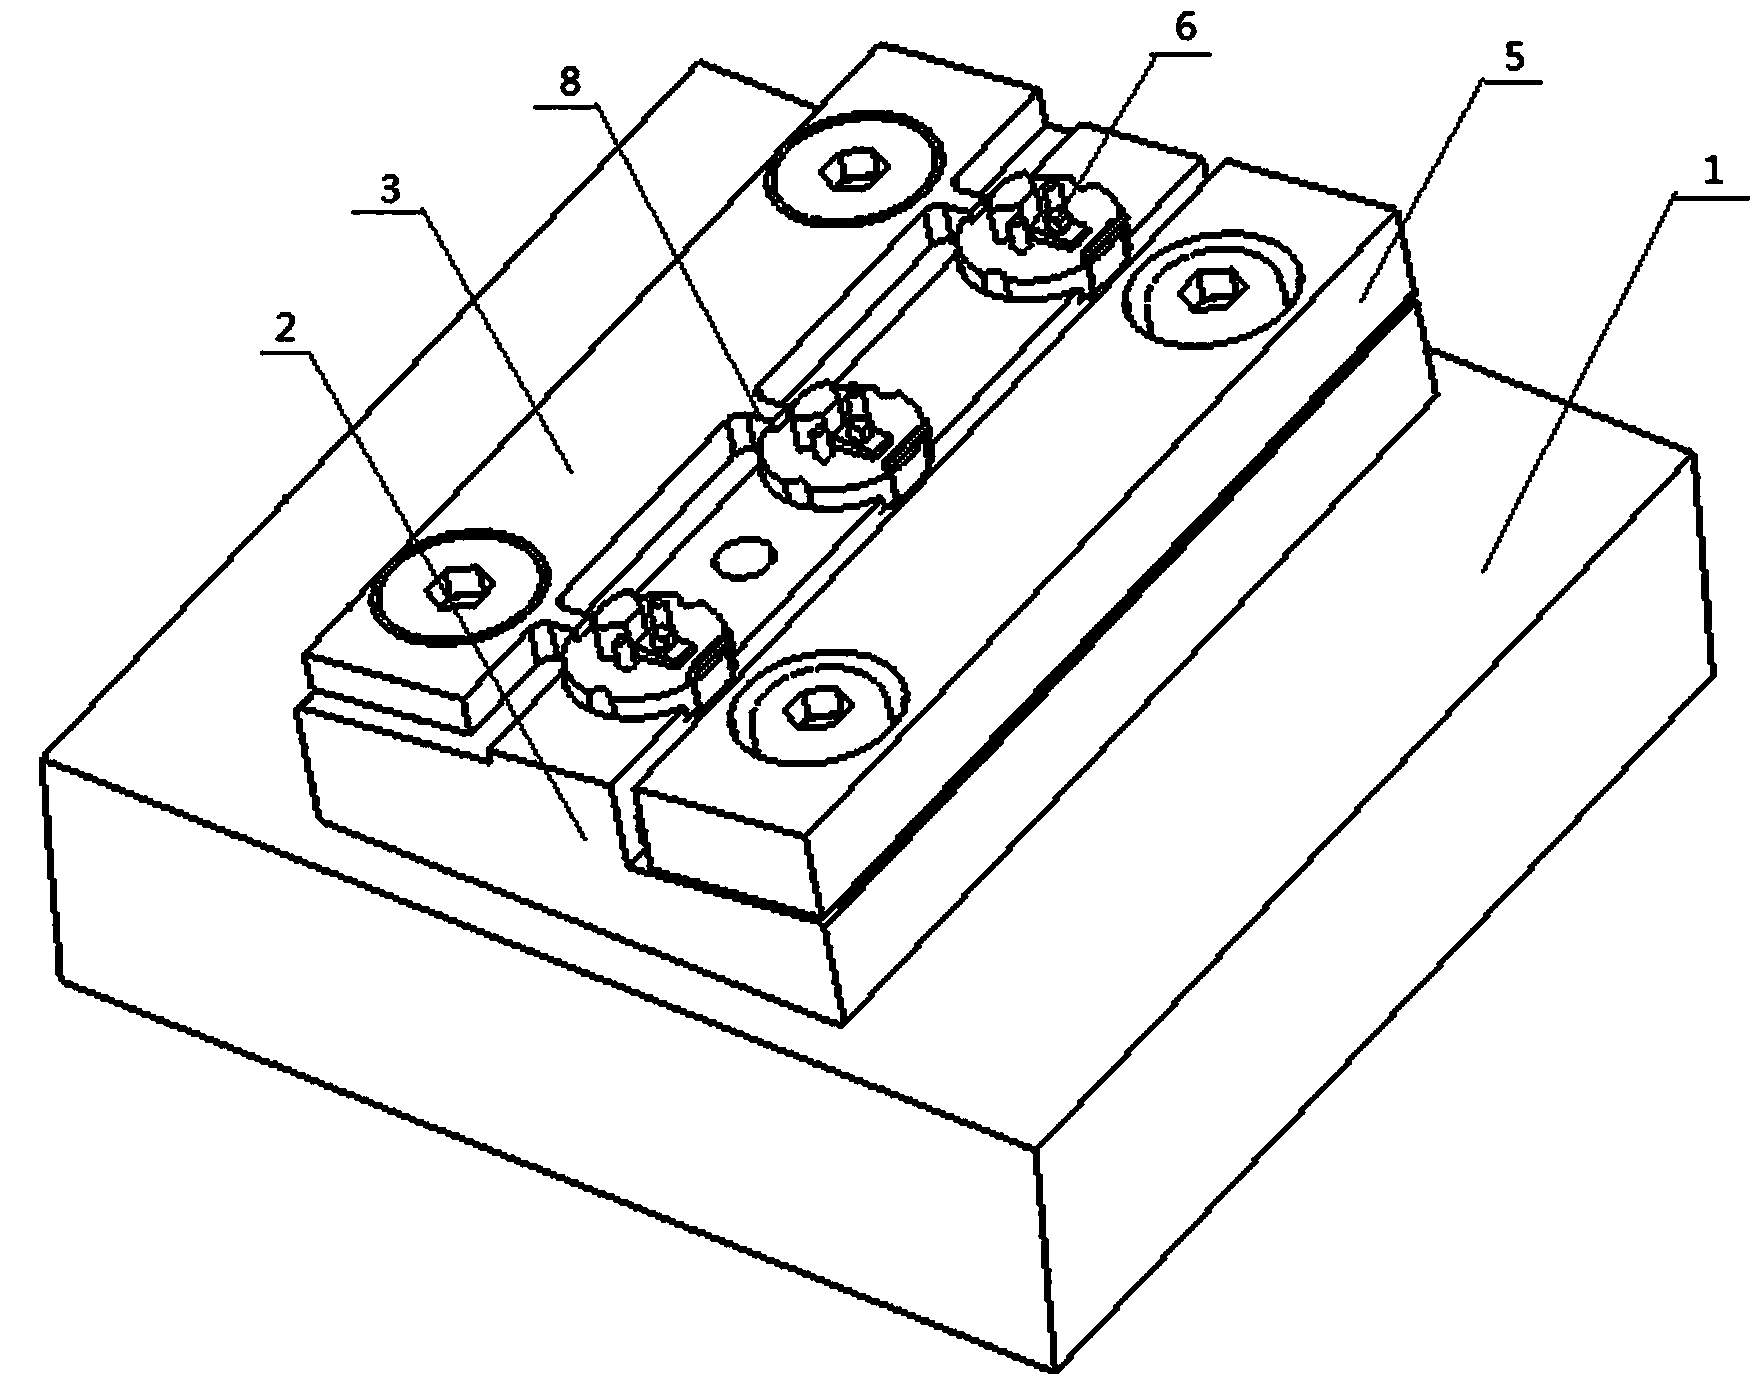 Clamping device for positioning tube socket